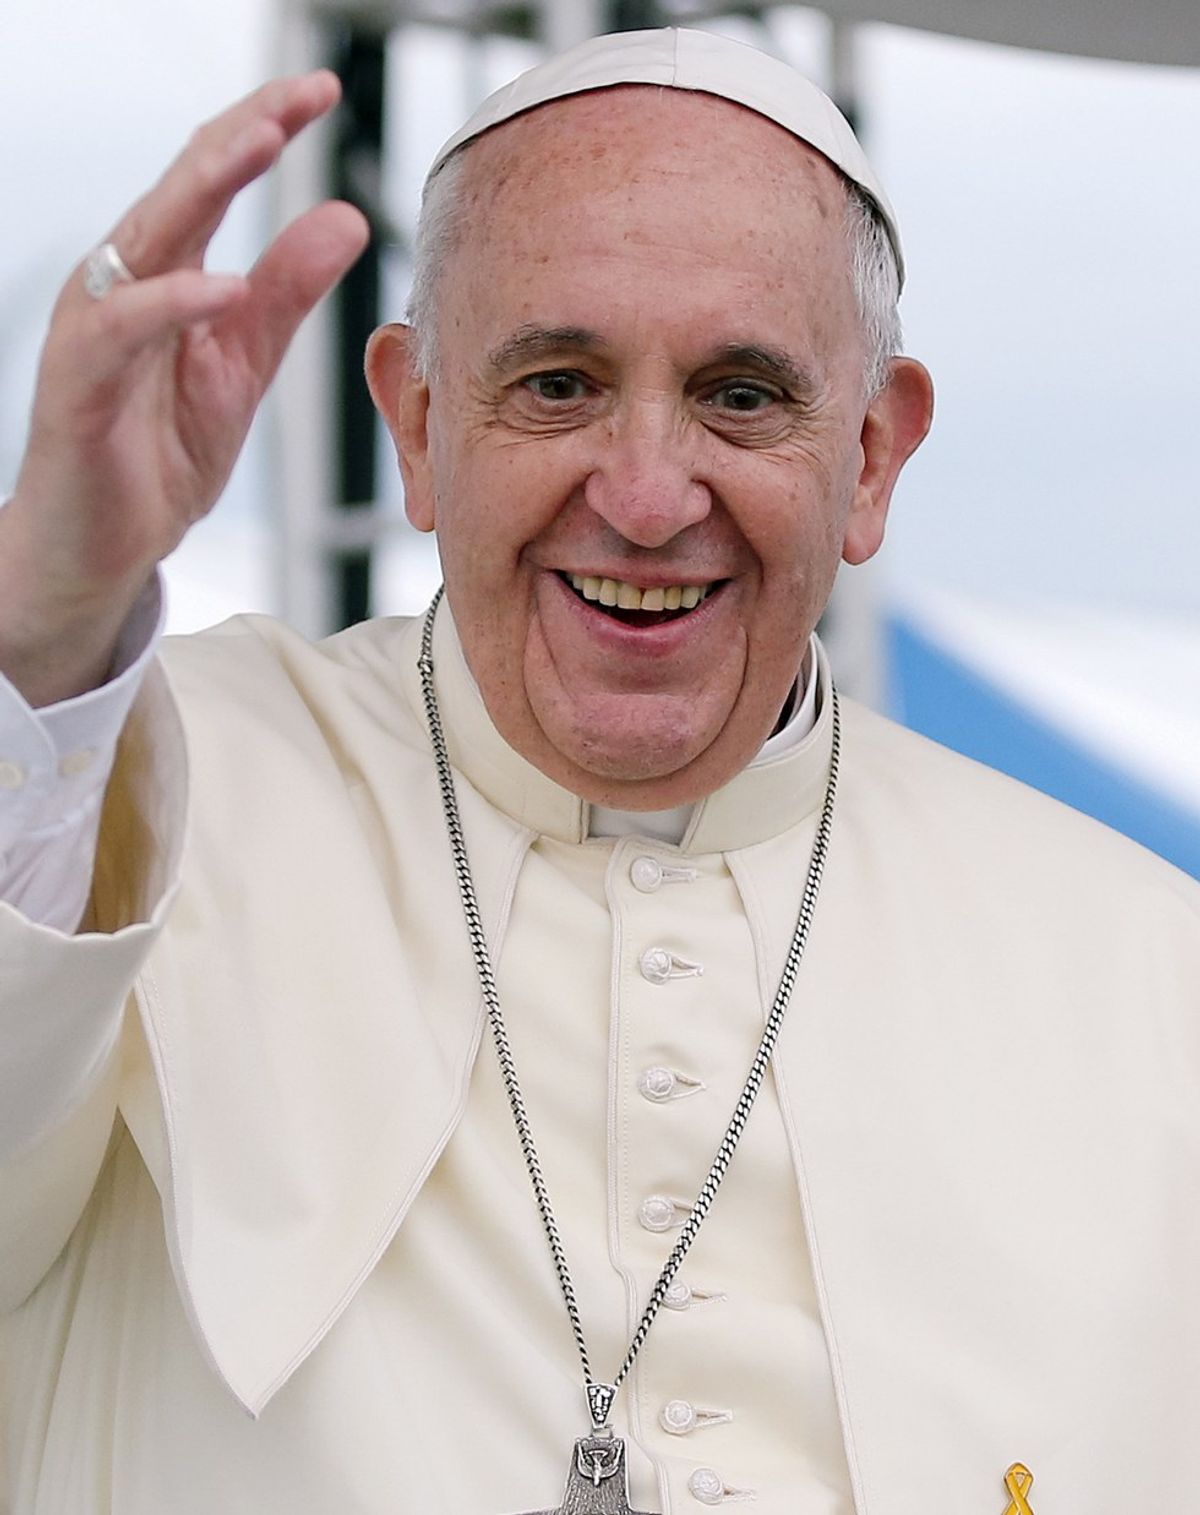 Pope Francis Is A Hypocrite And A Bigot